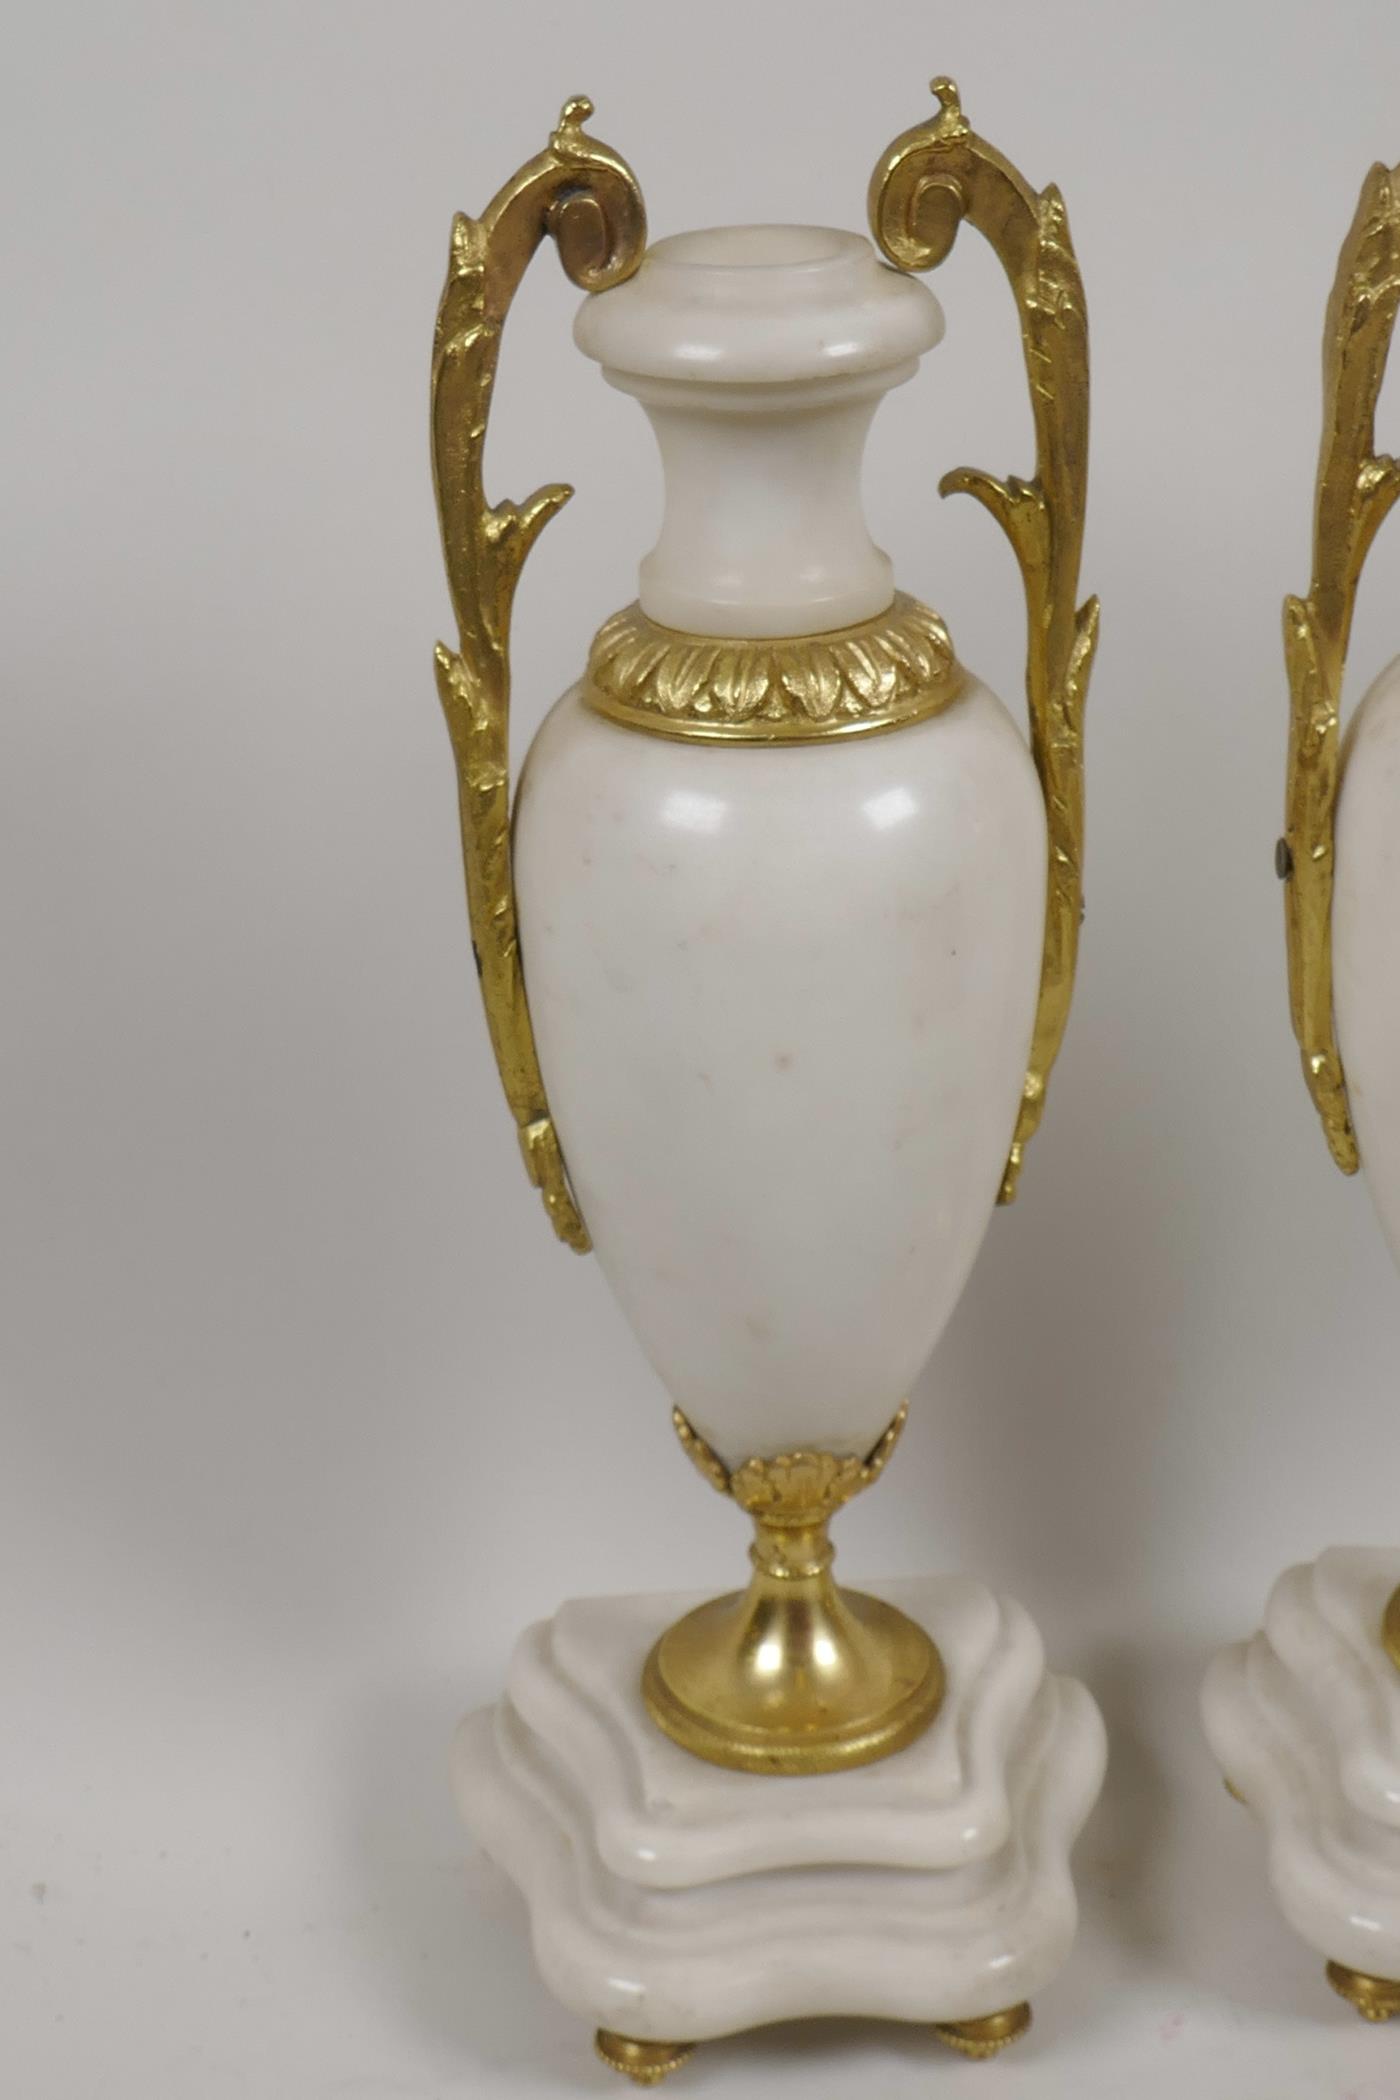 A pair of ormolu mounted white marble side urns on shaped plinth bases, 10½" high - Image 2 of 2